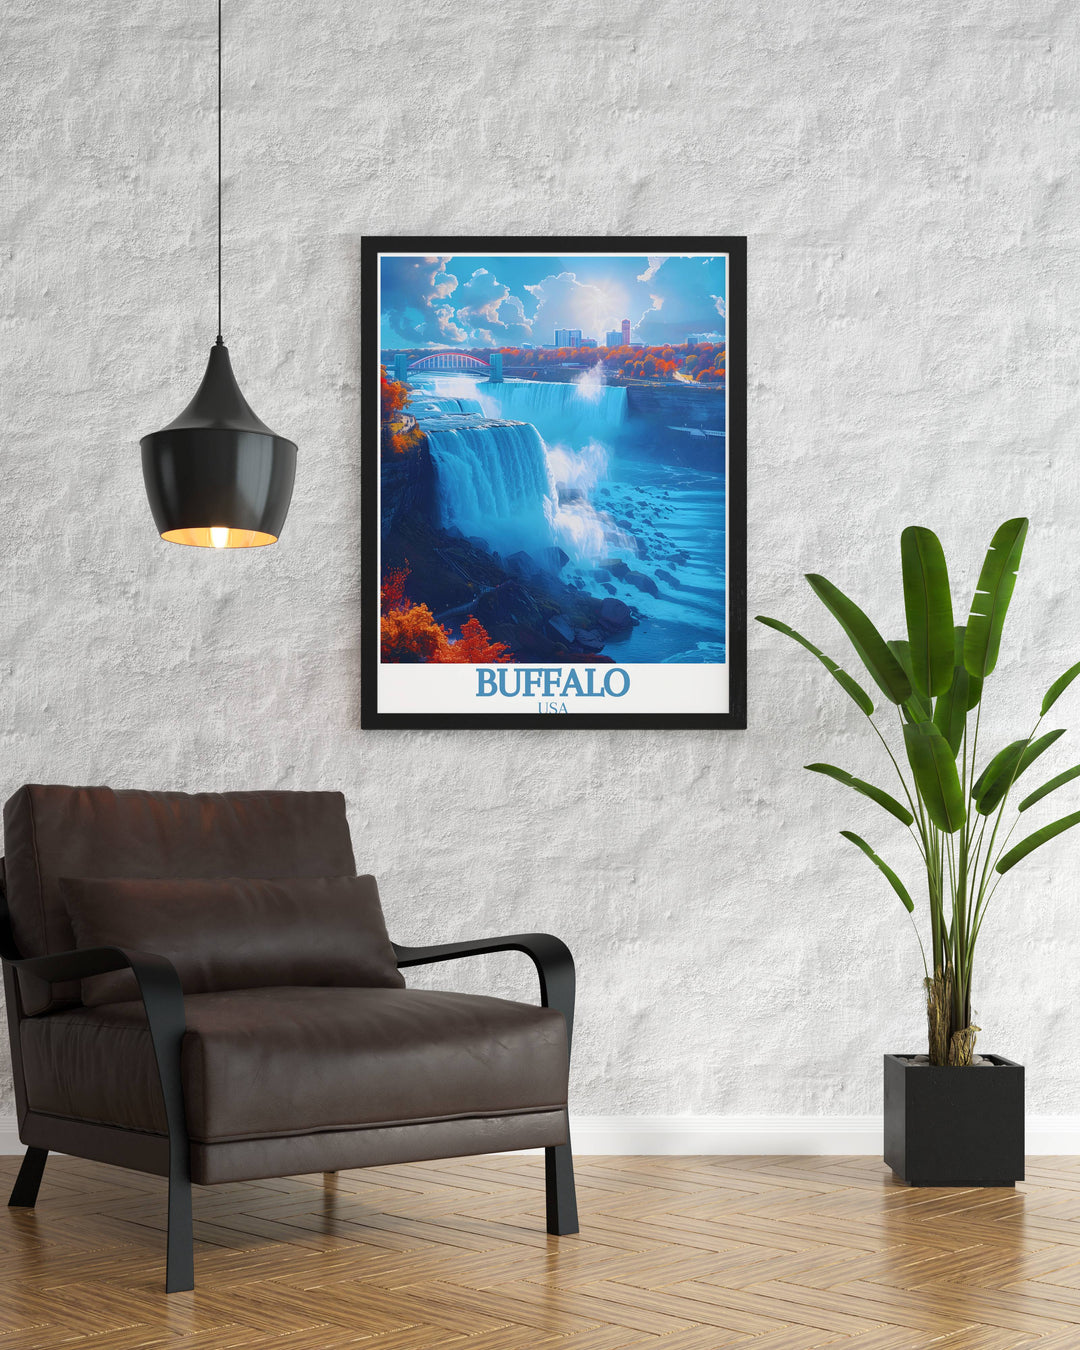 Buffalo cityscape travel poster with Niangara Falls showcasing the dynamic energy and scenic views of the city perfect for decorating your living room bedroom or office with a touch of Buffalo charm